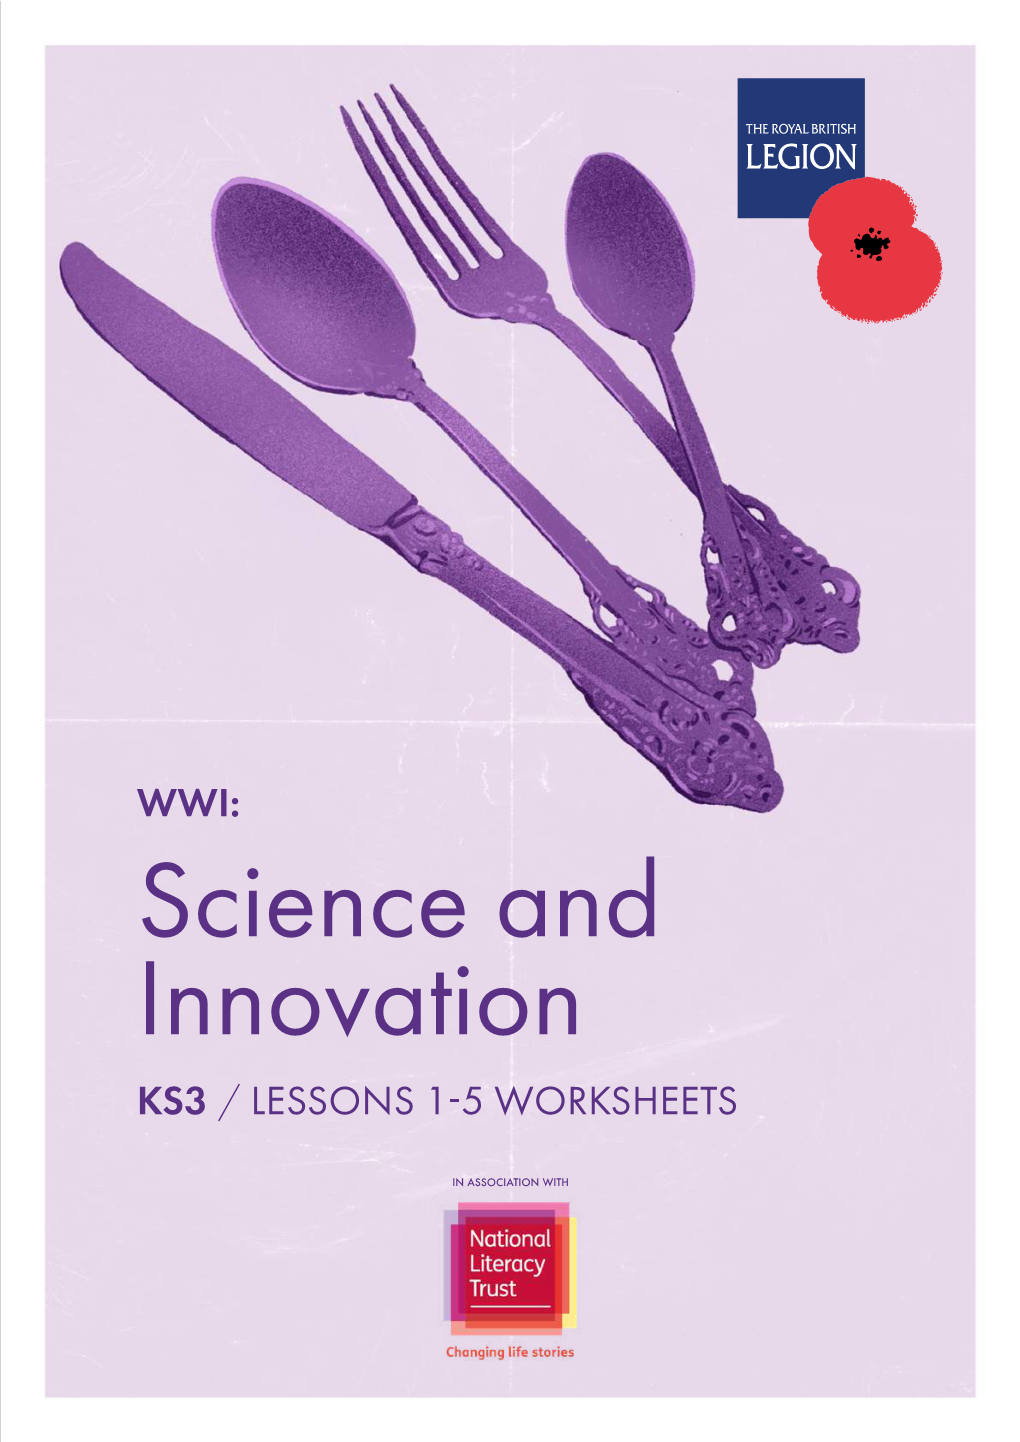 Science and Innovation KS3 / LESSONS 1-5 WORKSHEETS